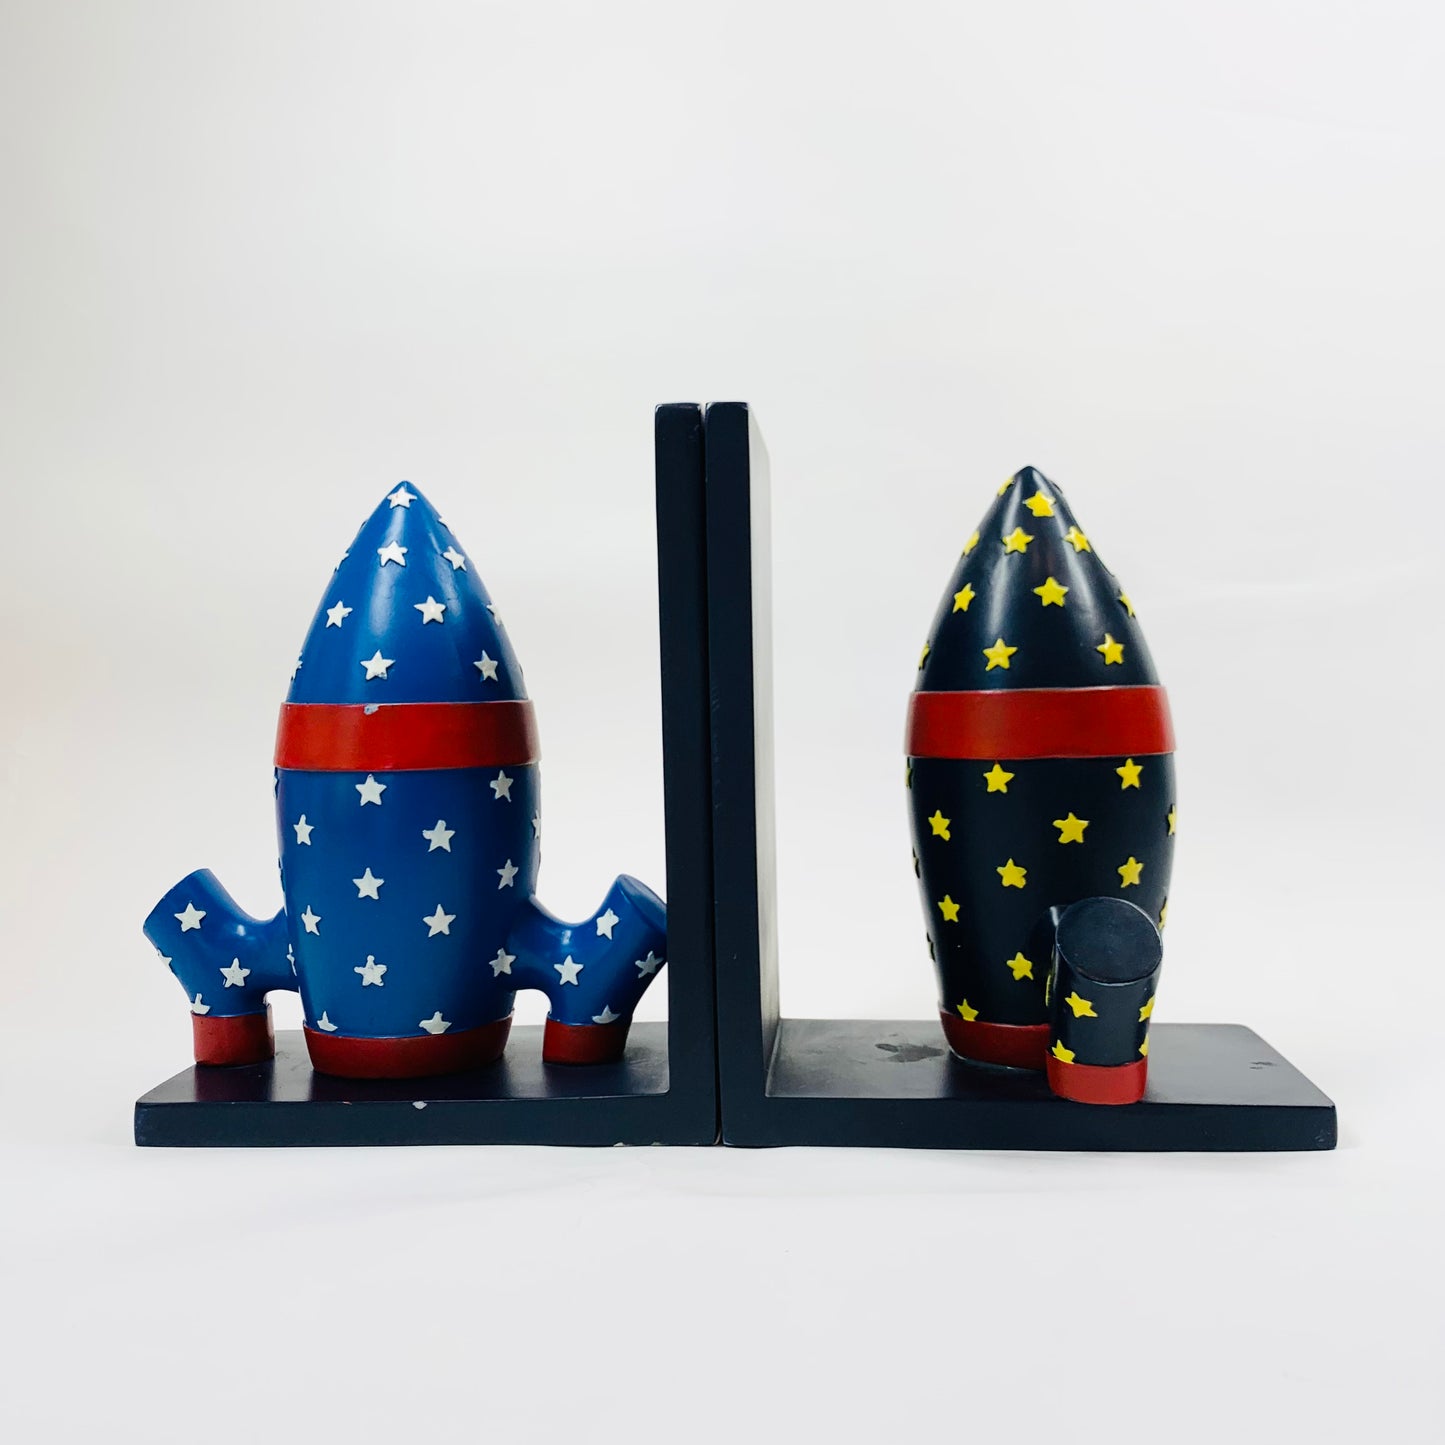 Extremely rare set of 1970s space shuttle resin bookends